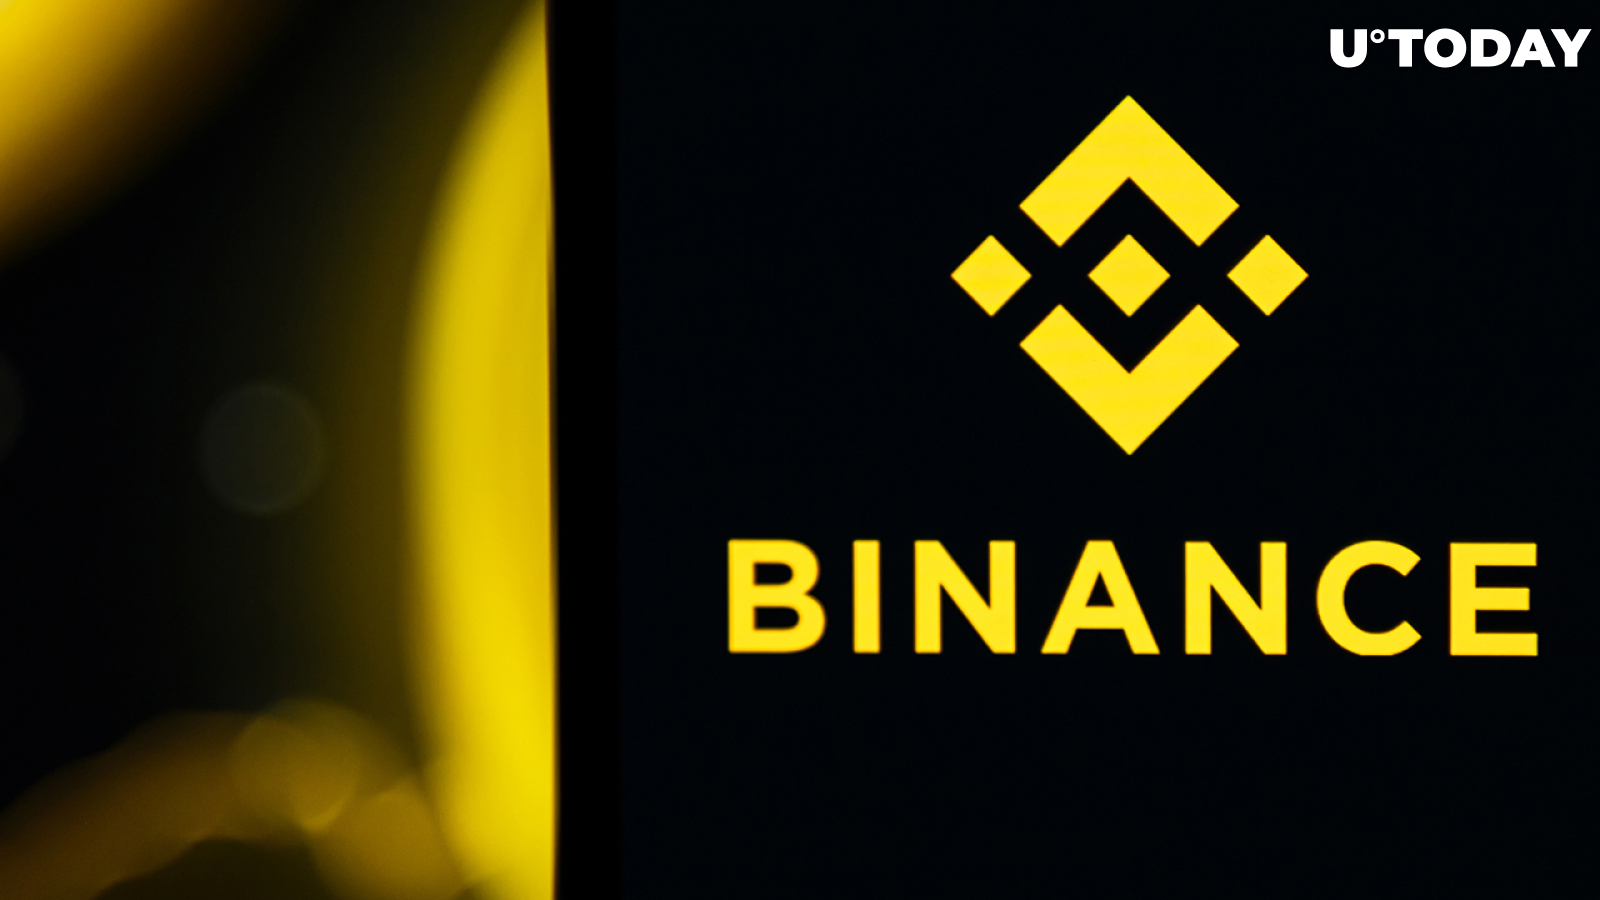 Binance Encourages Terra Developers to Join Its Team